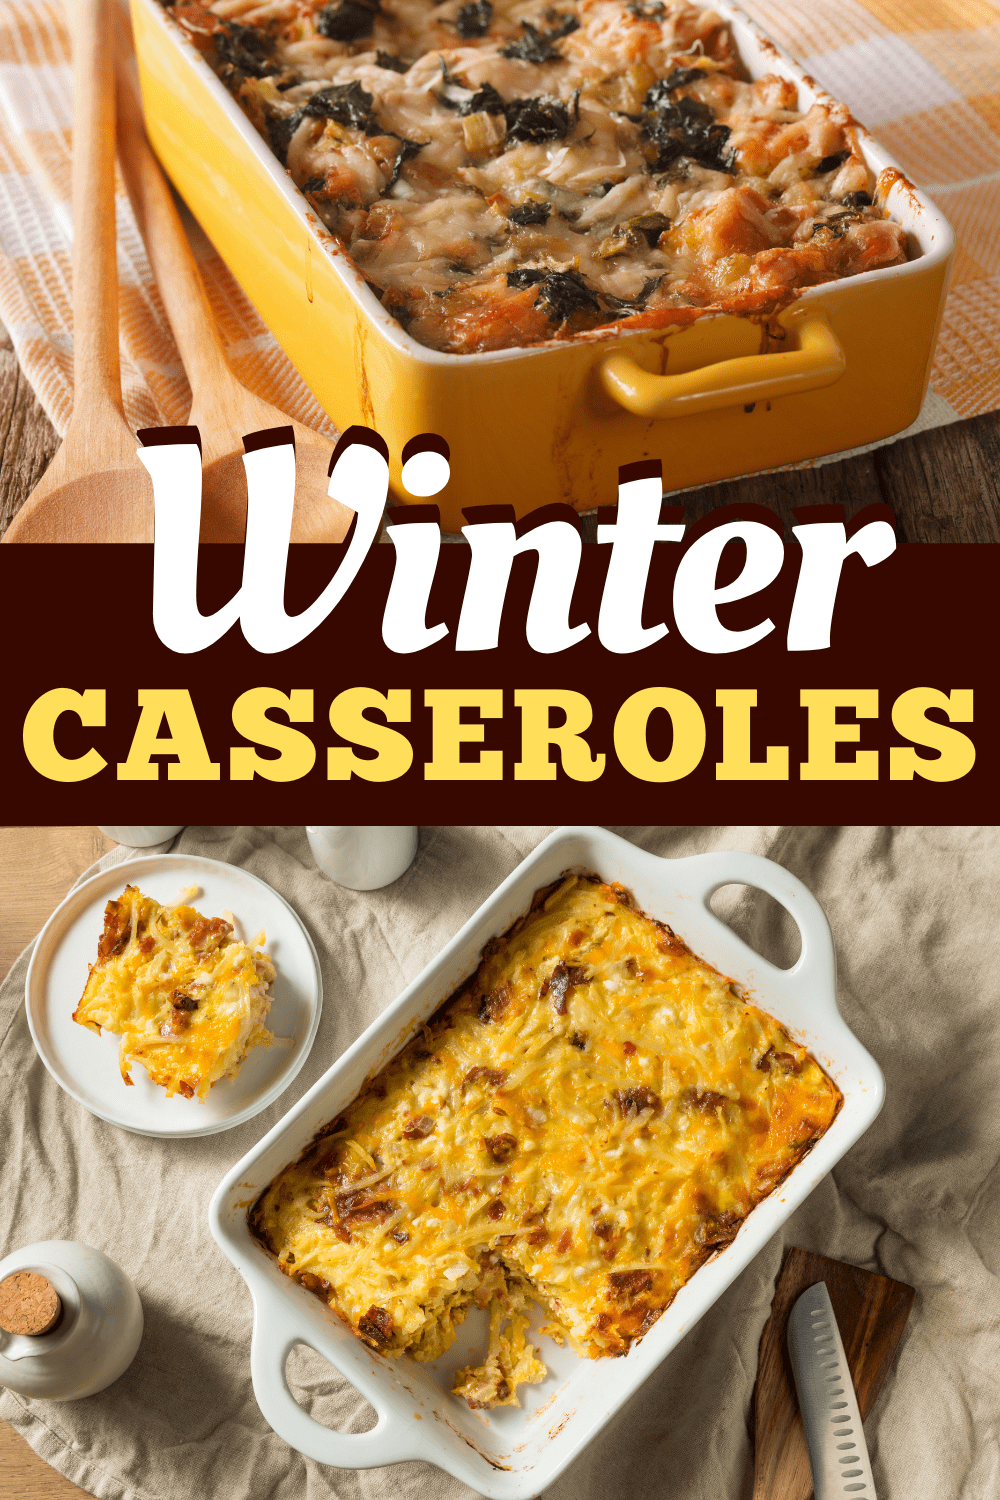 25 Best Winter Casseroles For Chilly Days - forestairplane